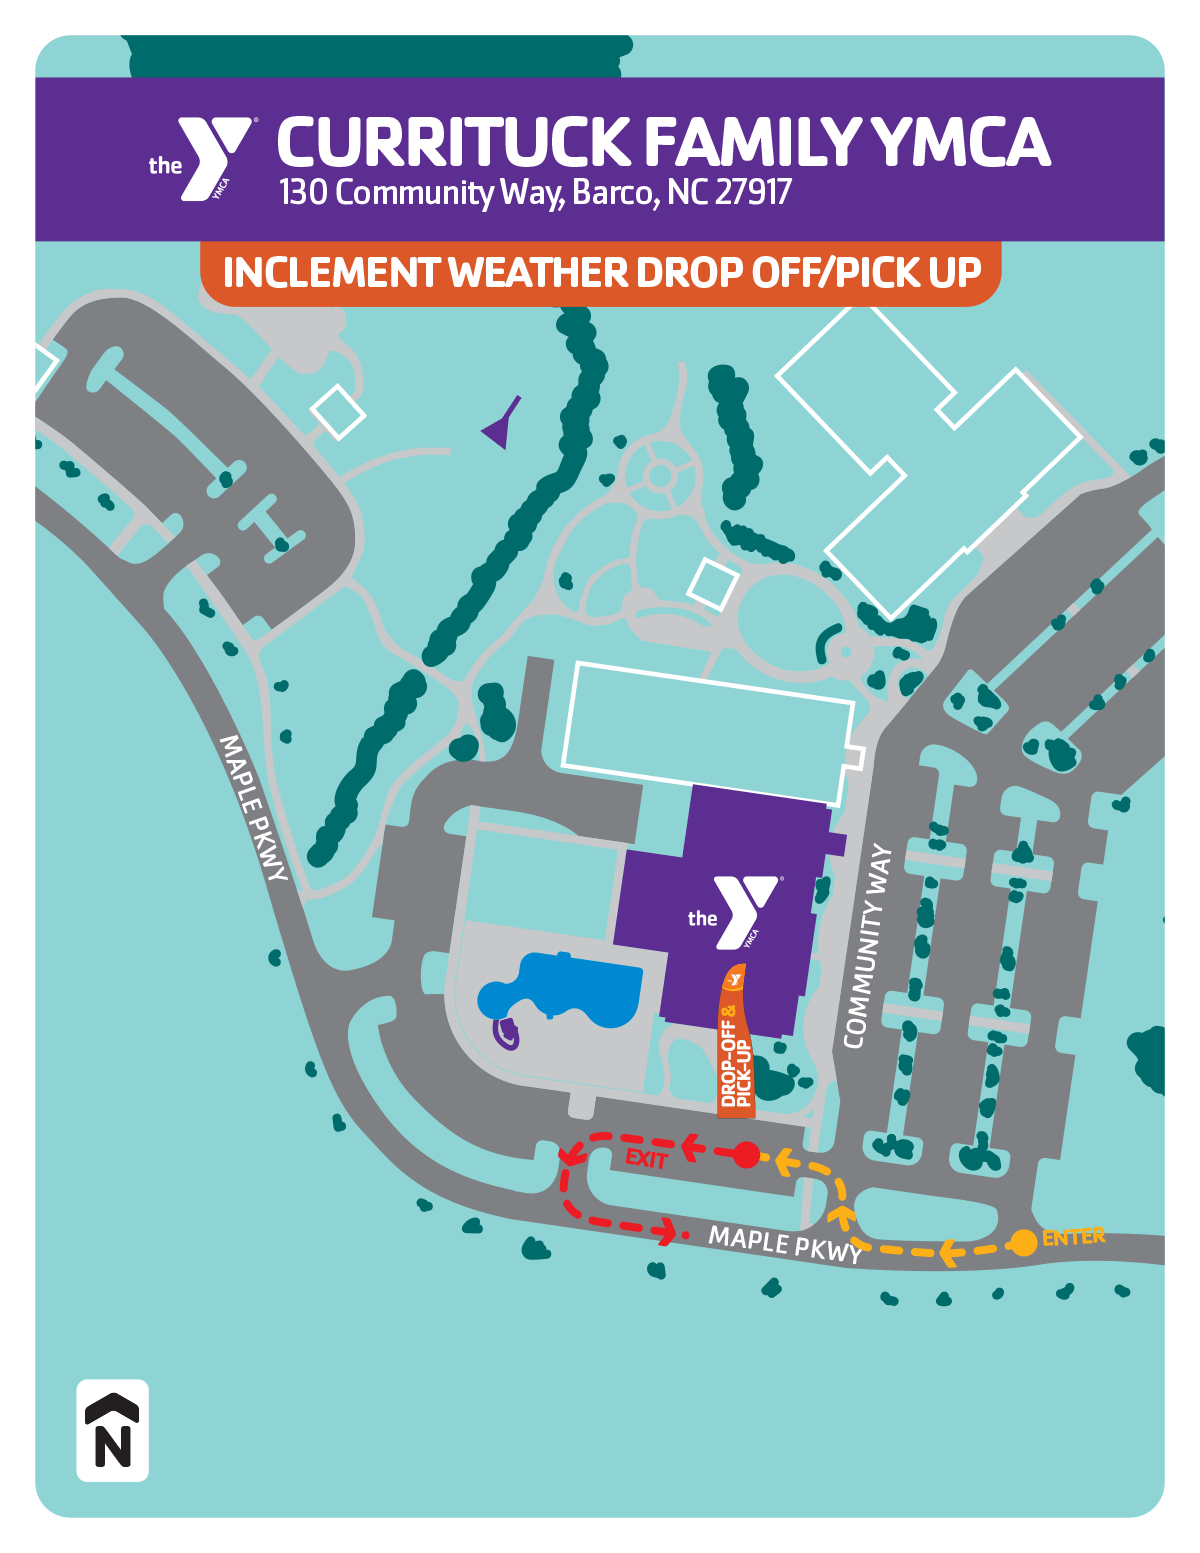 Summer camp inclement weather drop-off & pick-up locations for the Currituck Family YMCA